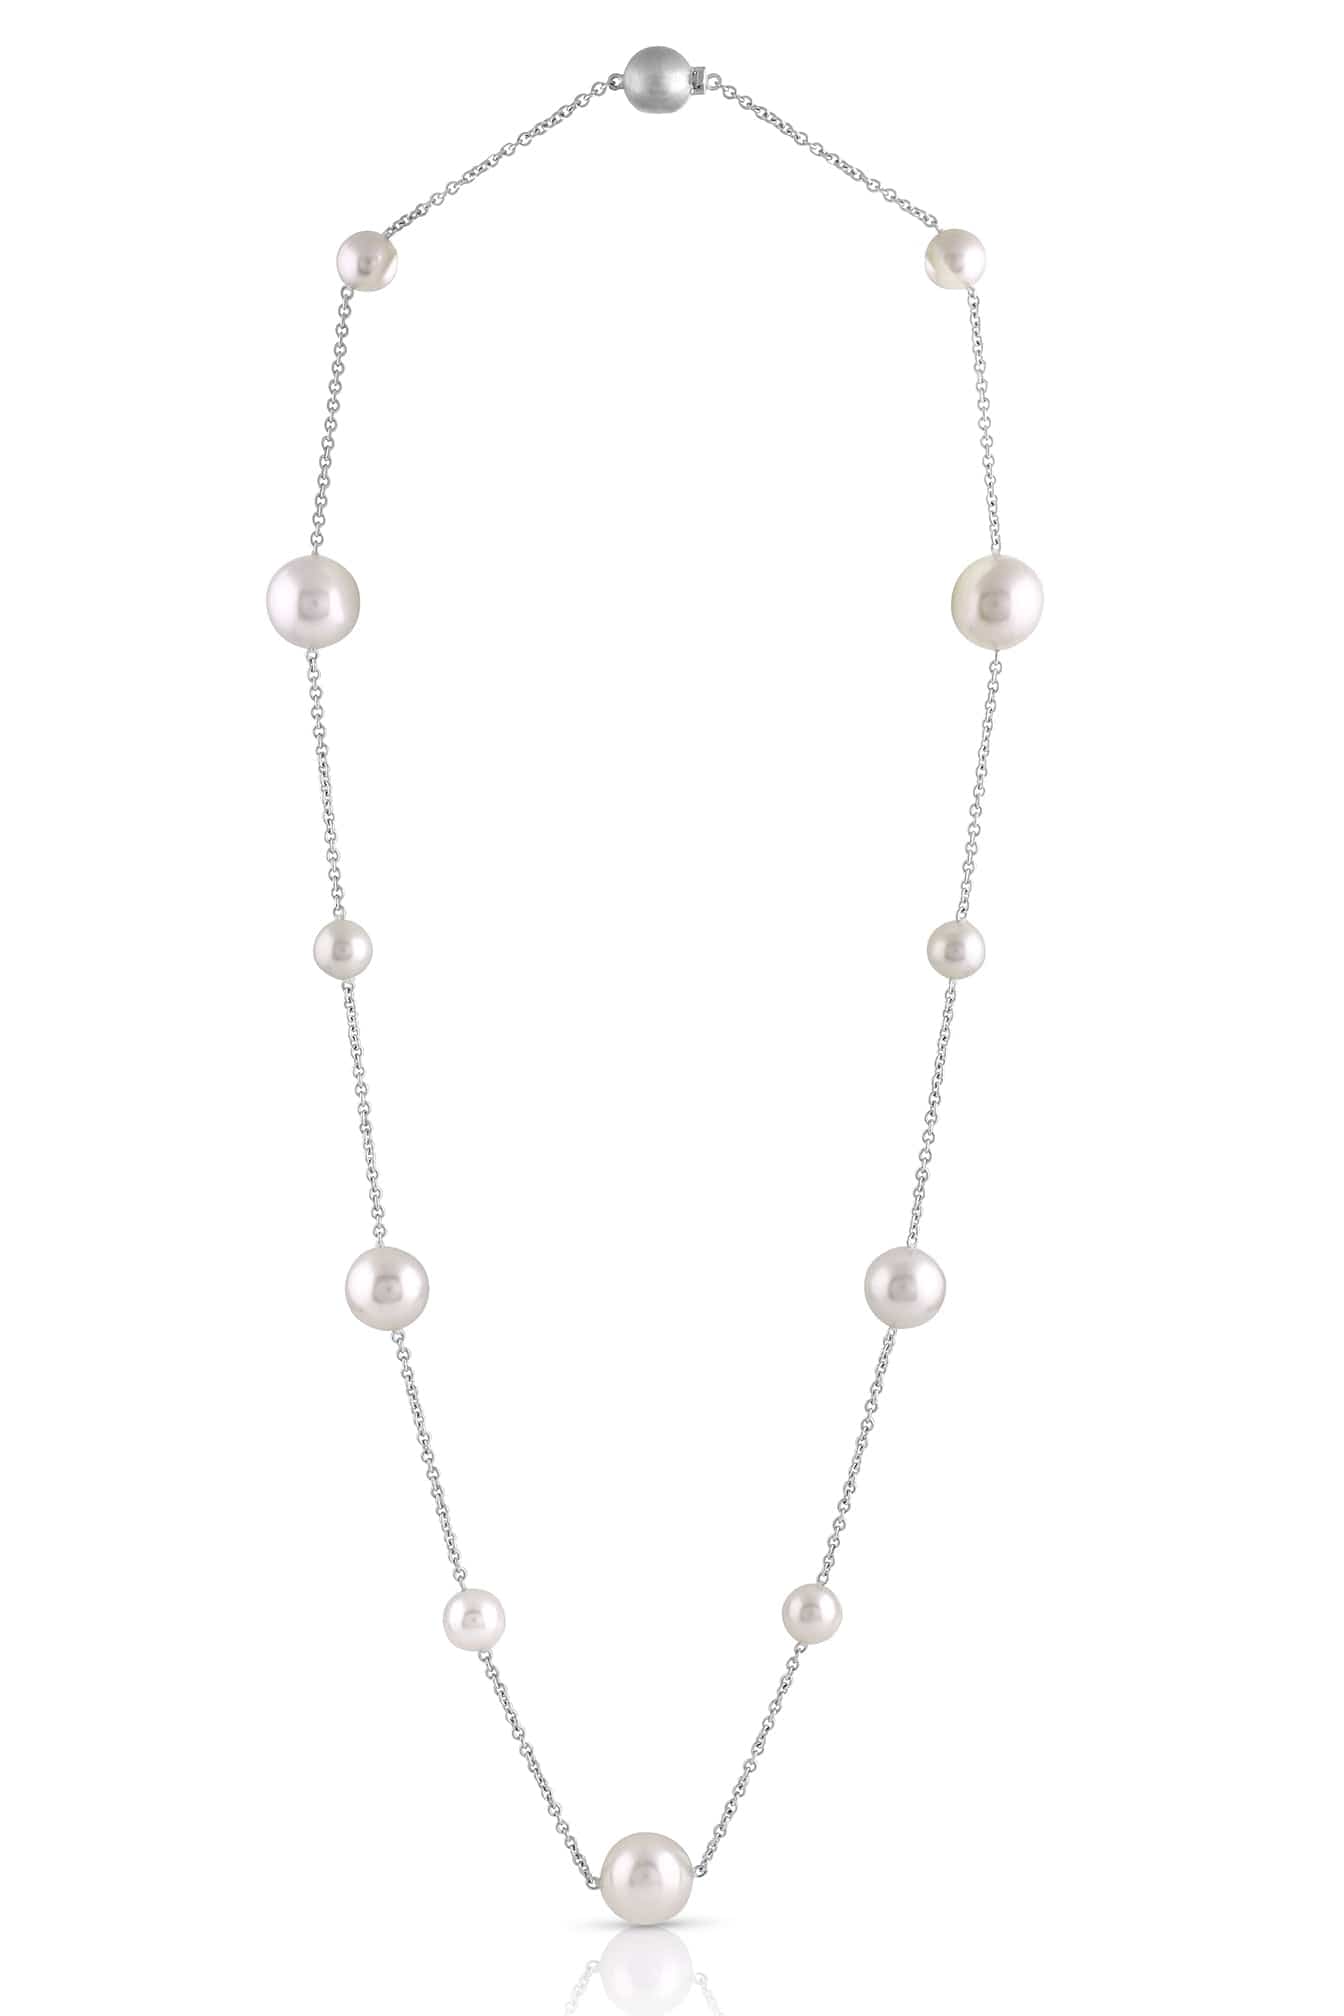 BAGGINS-South Sea Pearl Chain Necklace-WHITE GOLD